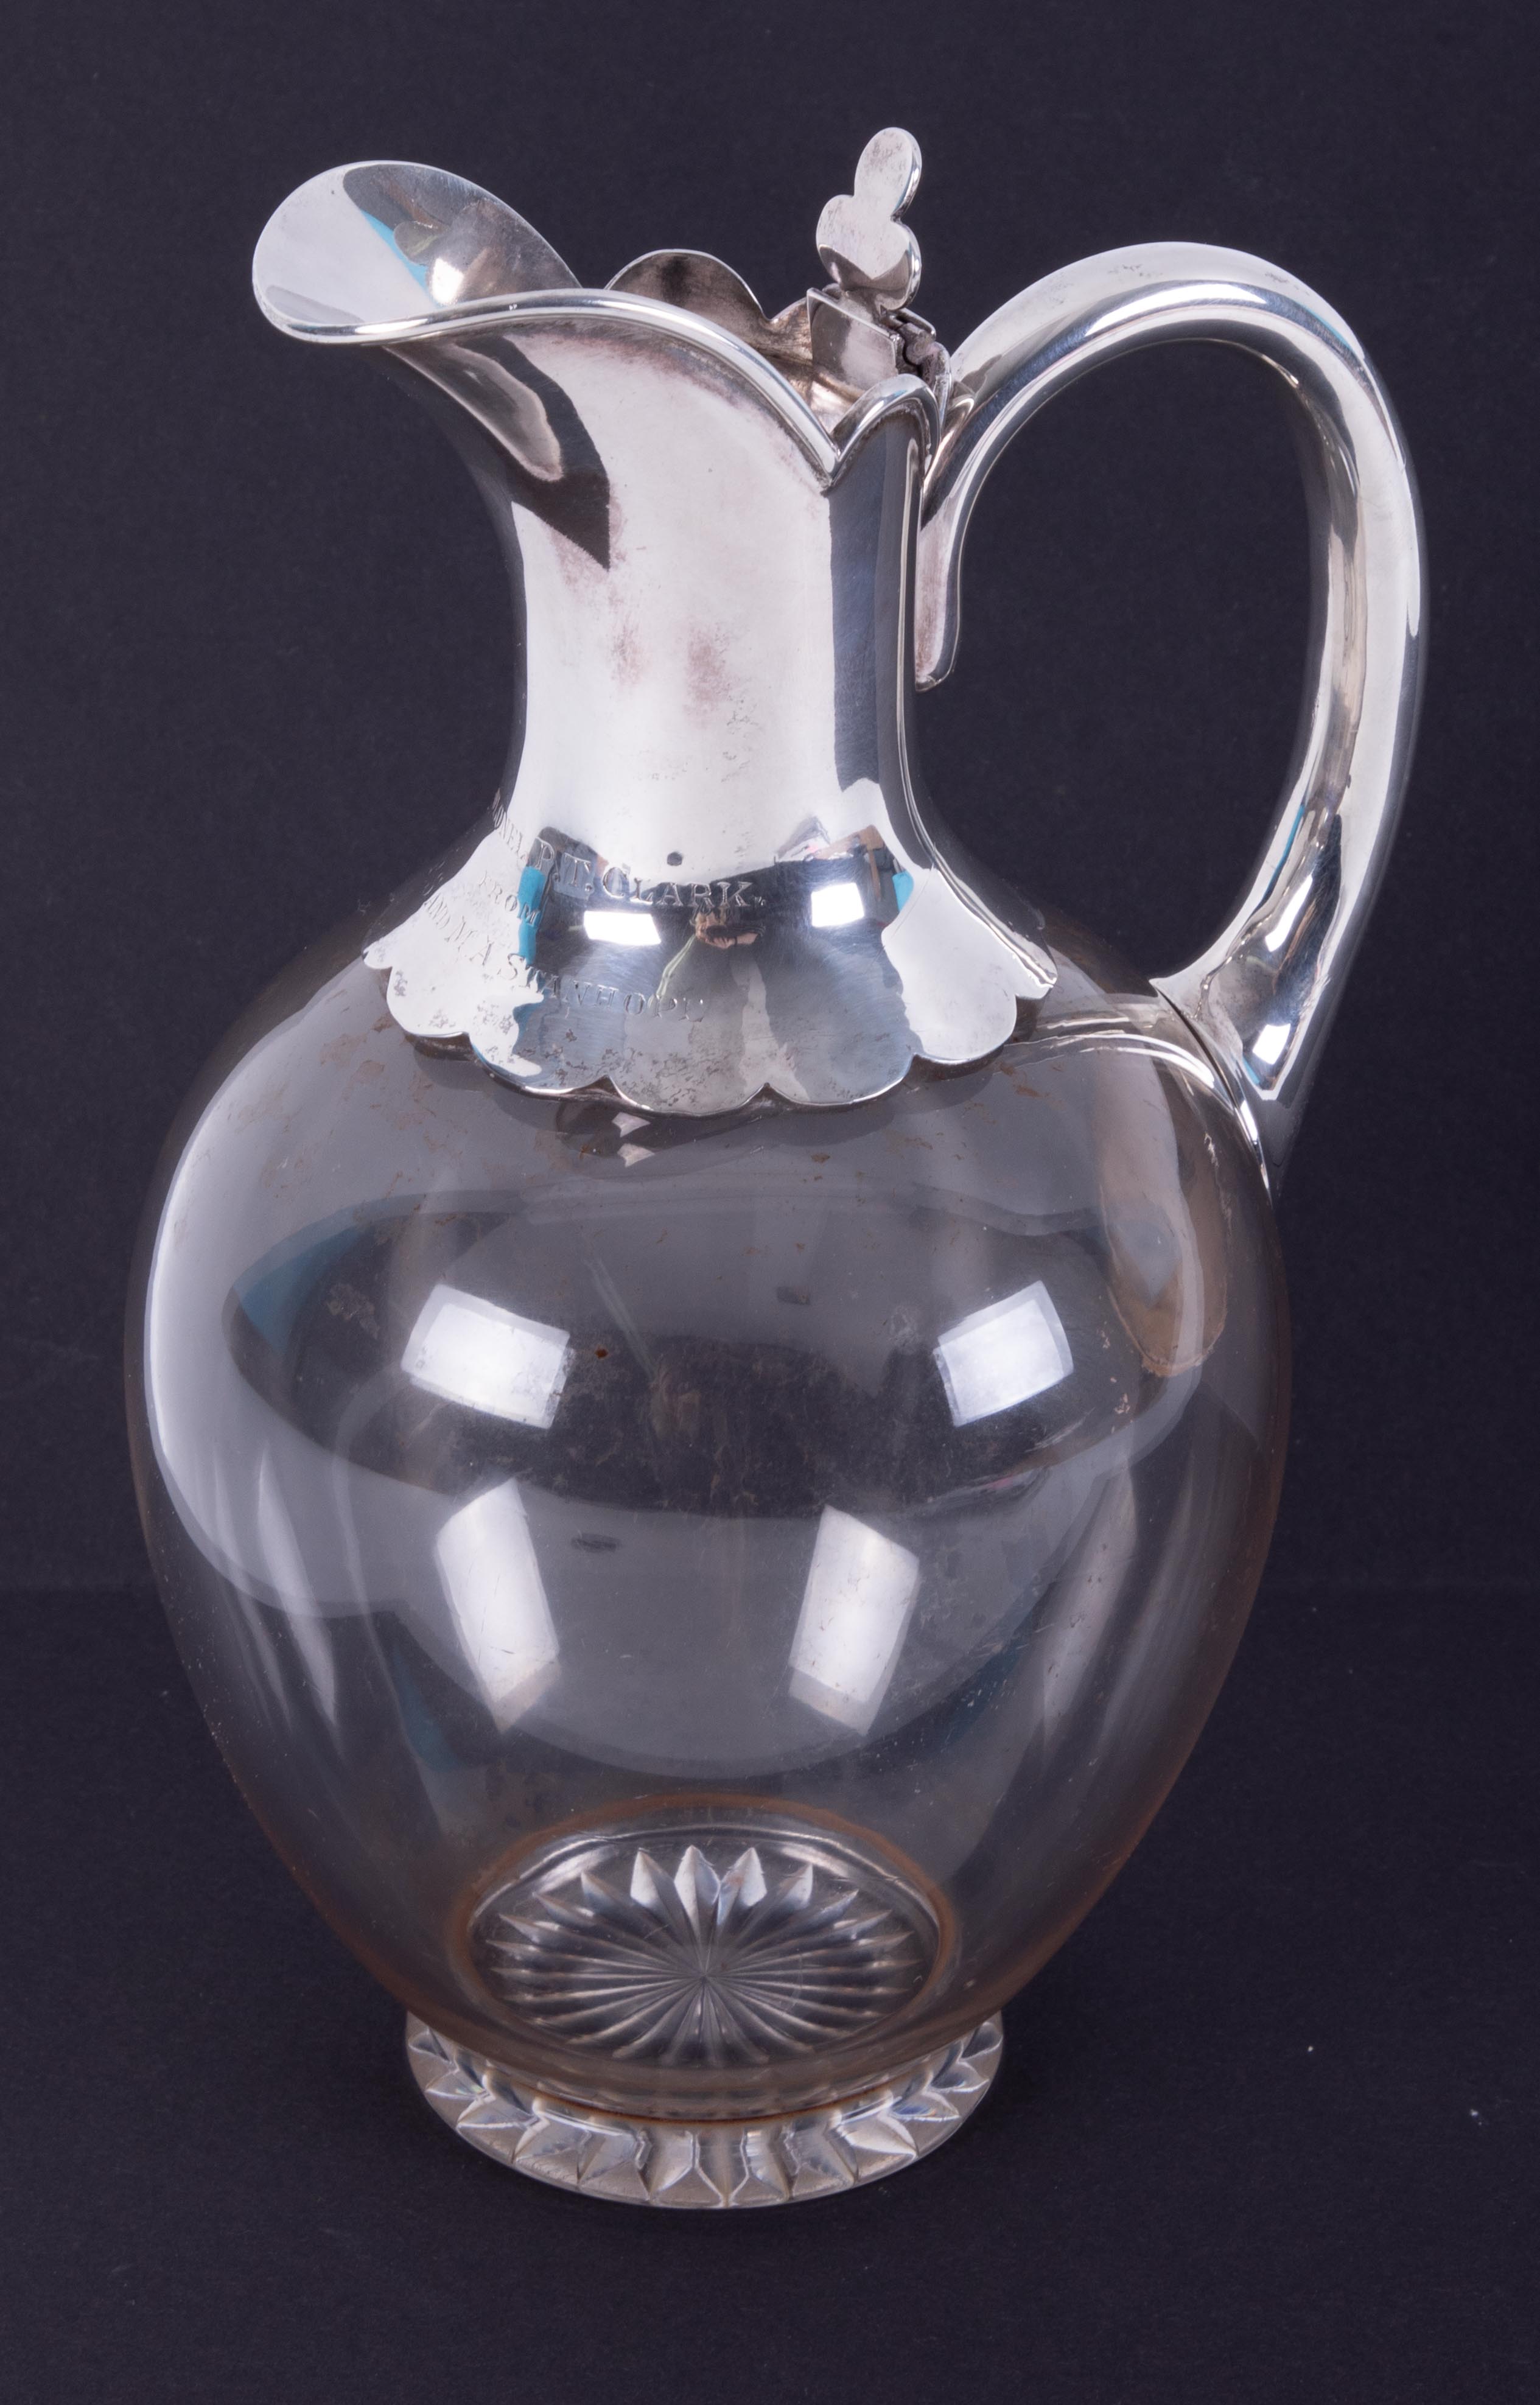 A silver & glass claret jug, makers mark J.G & S with emblem engraved on the lid (no. 43), height